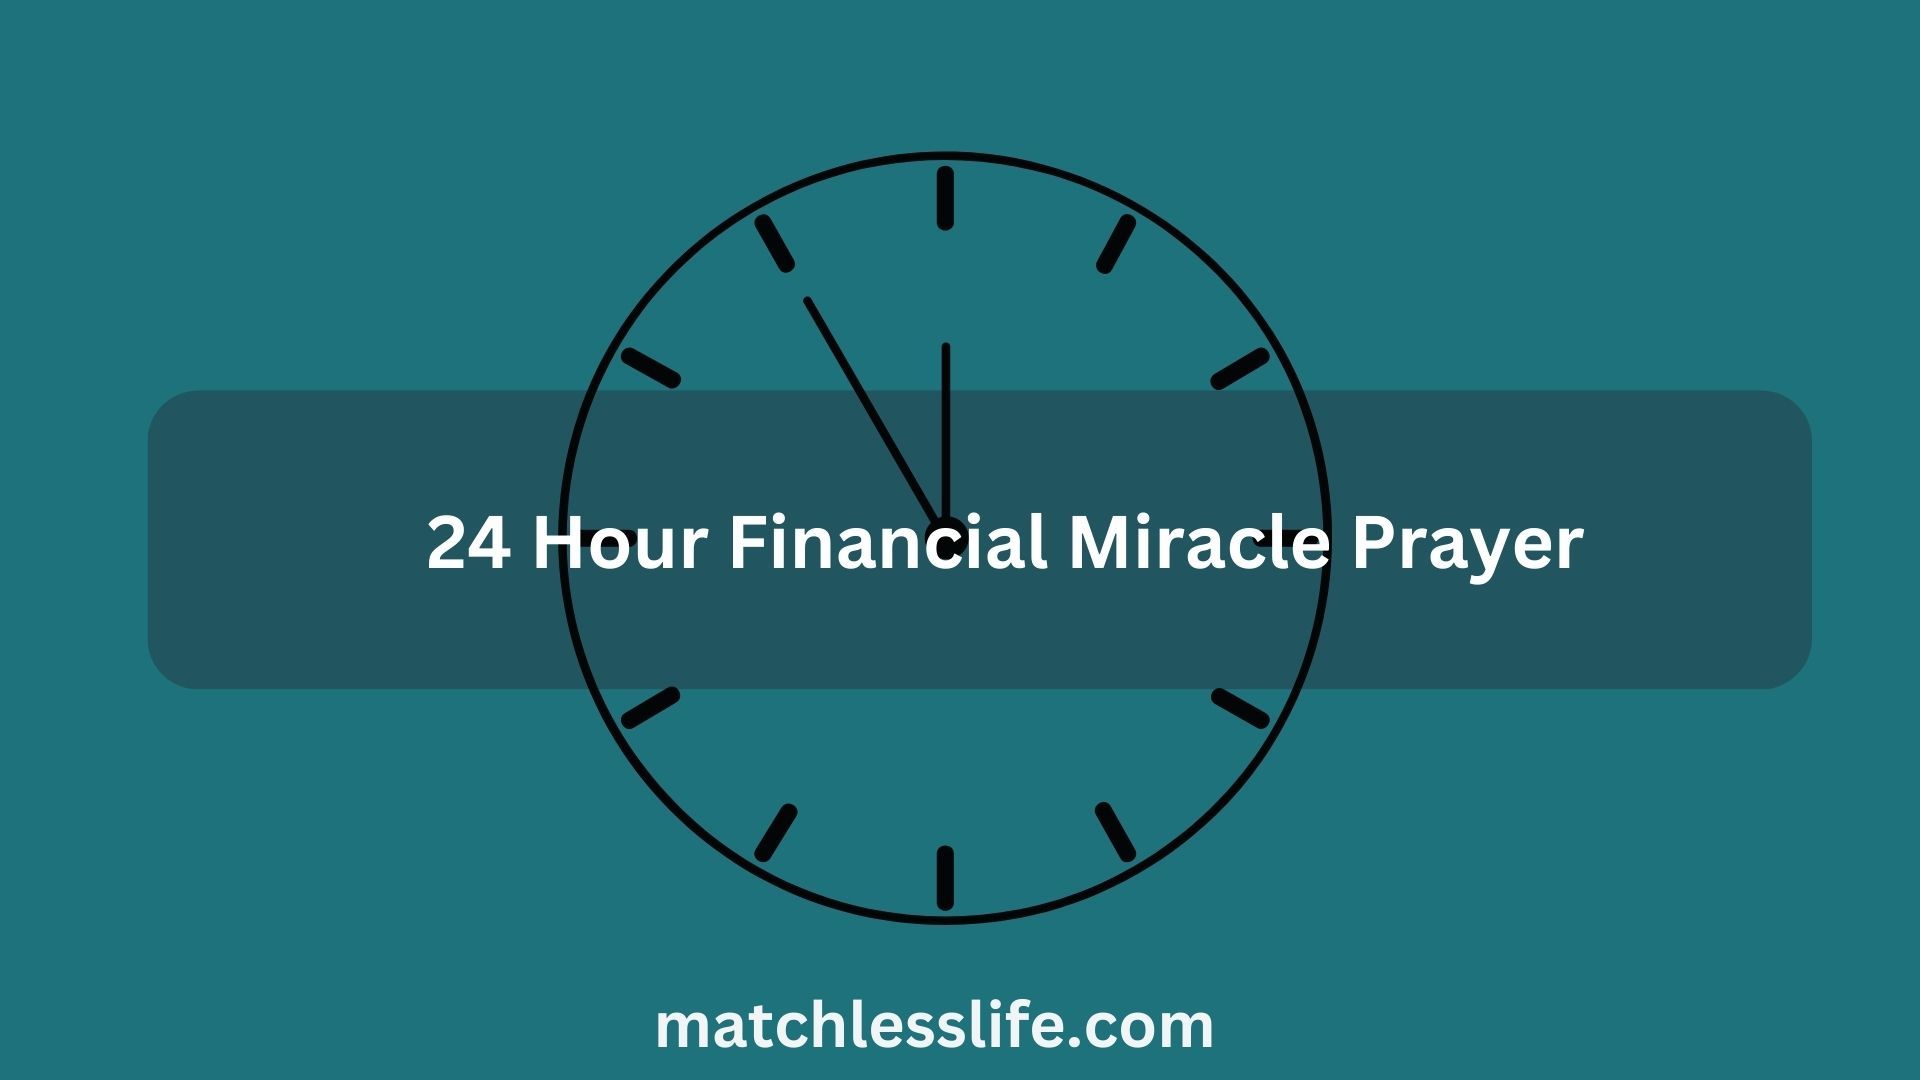 24 Hour Financial Miracle Prayer